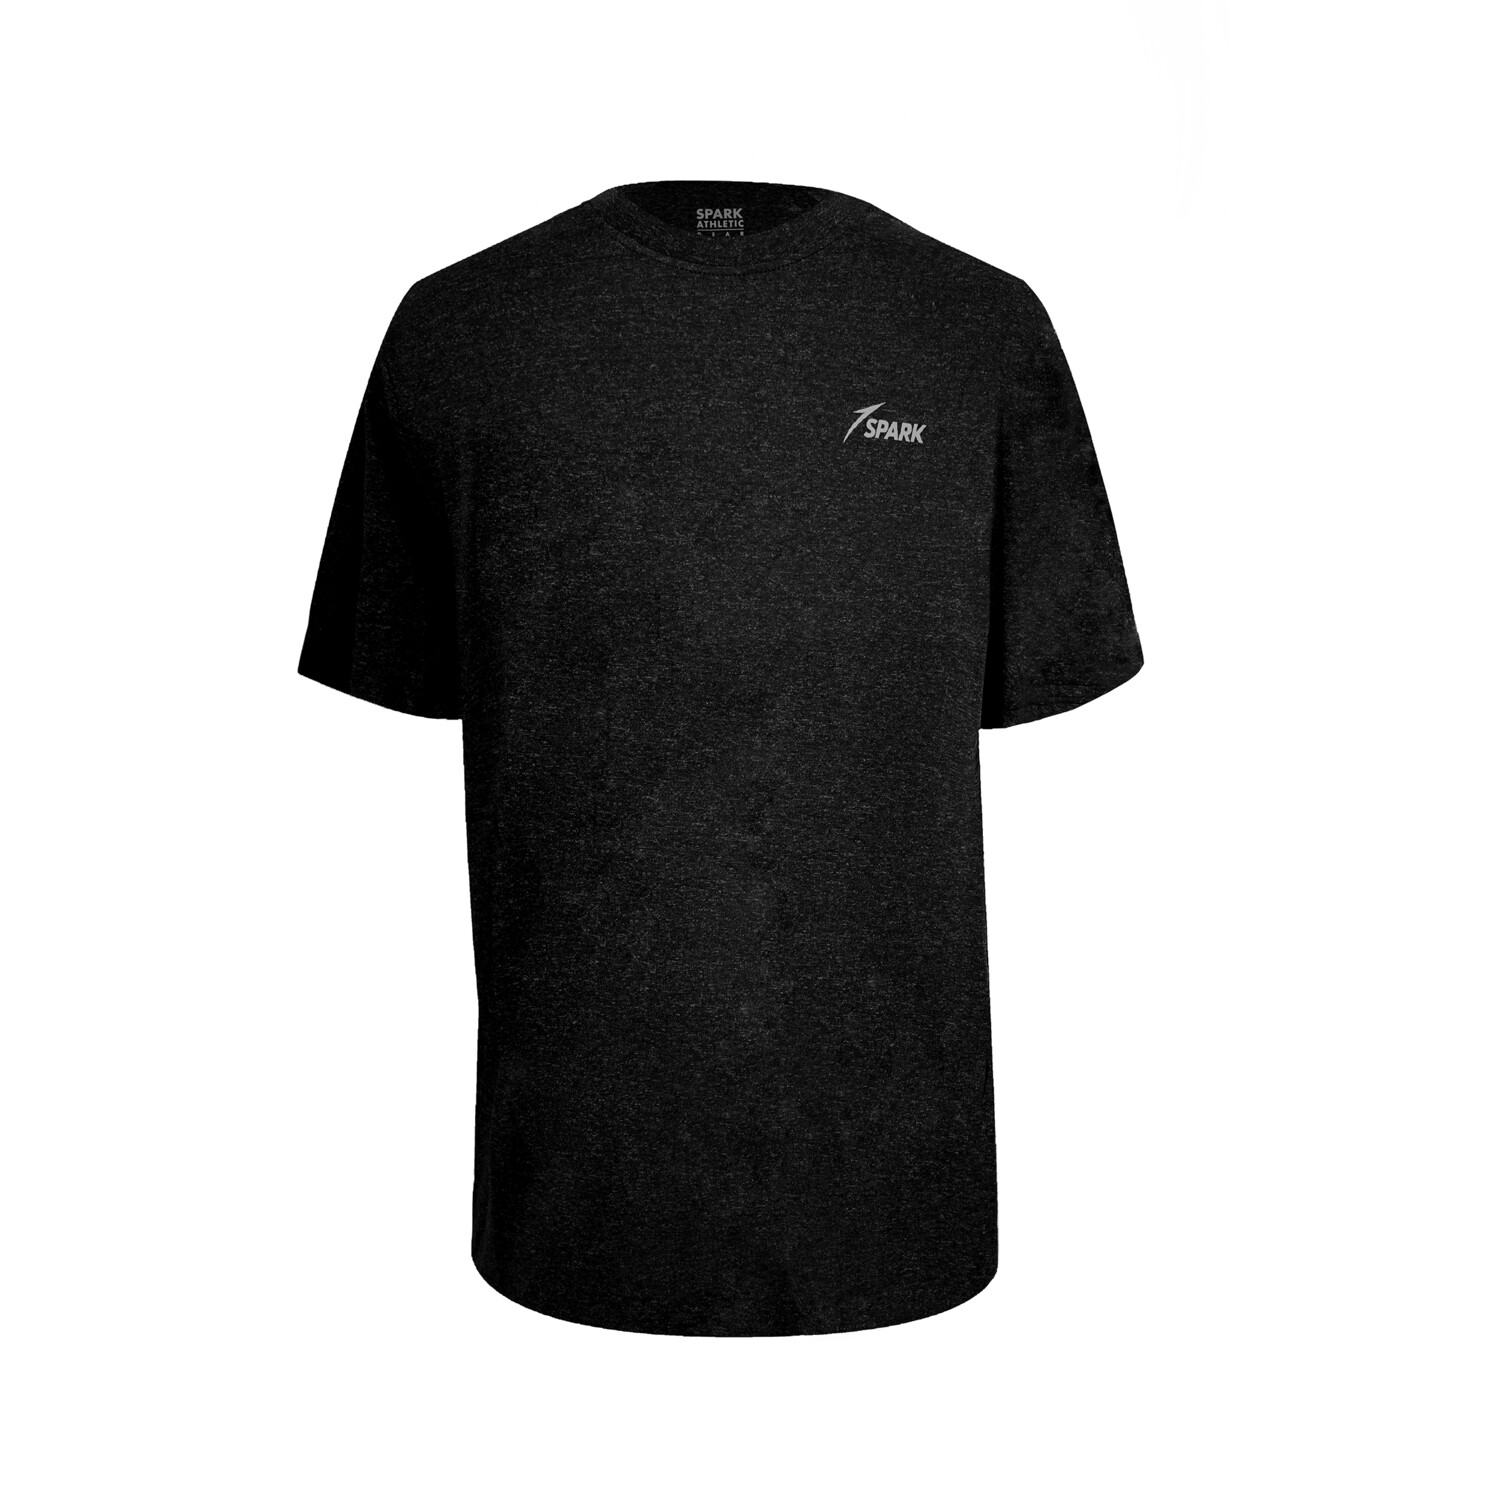 SPARK Fit Classic Shirt